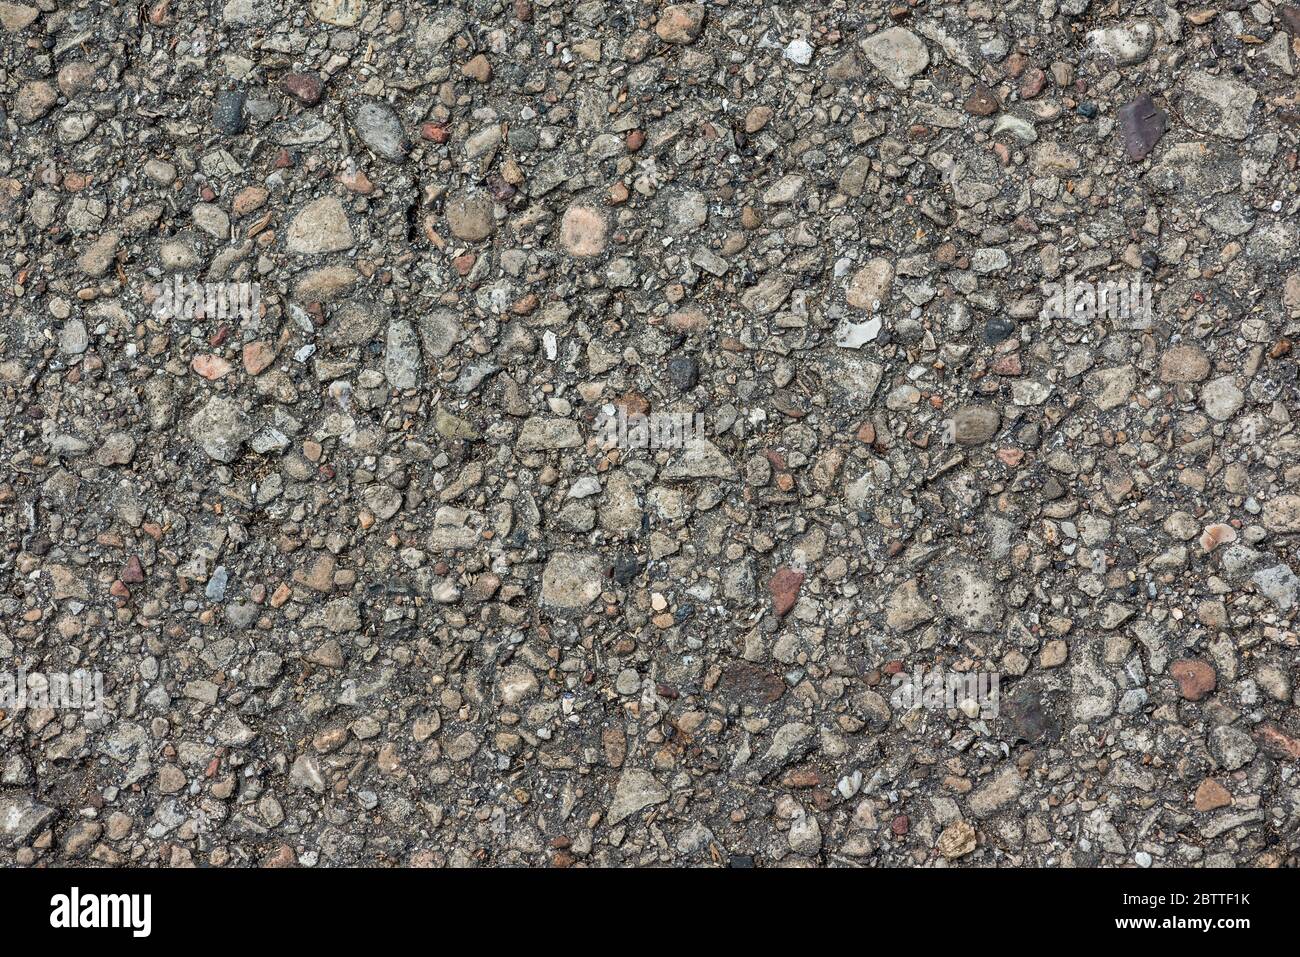 Abstract pattern of gravel, natural road texture, rock material Stock Photo